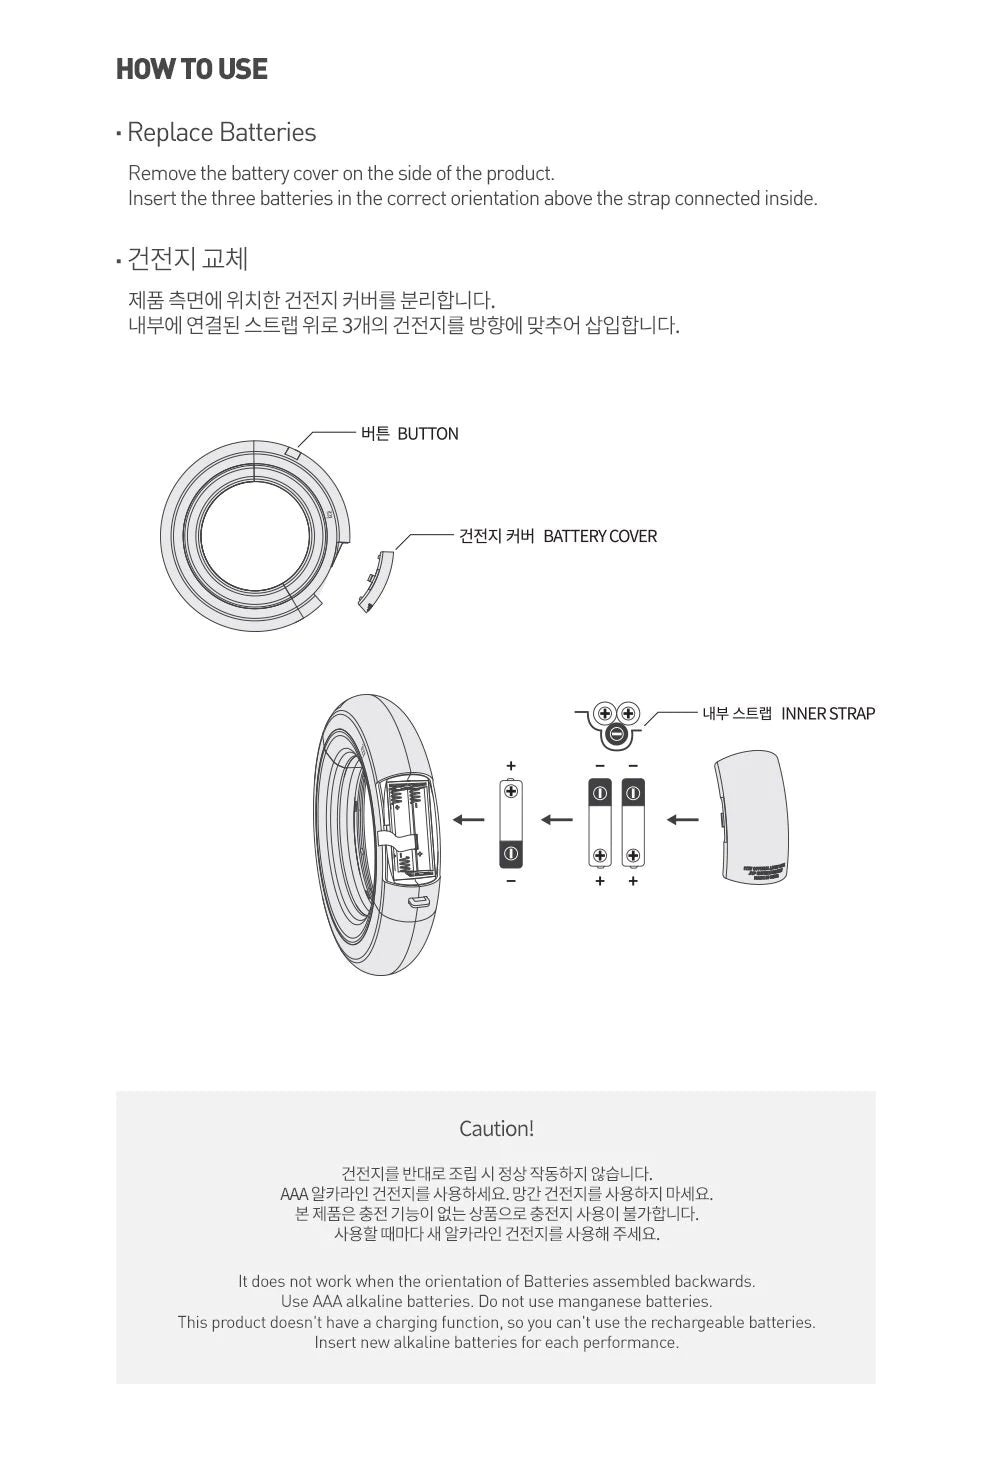 ITZY - Official Light Ring